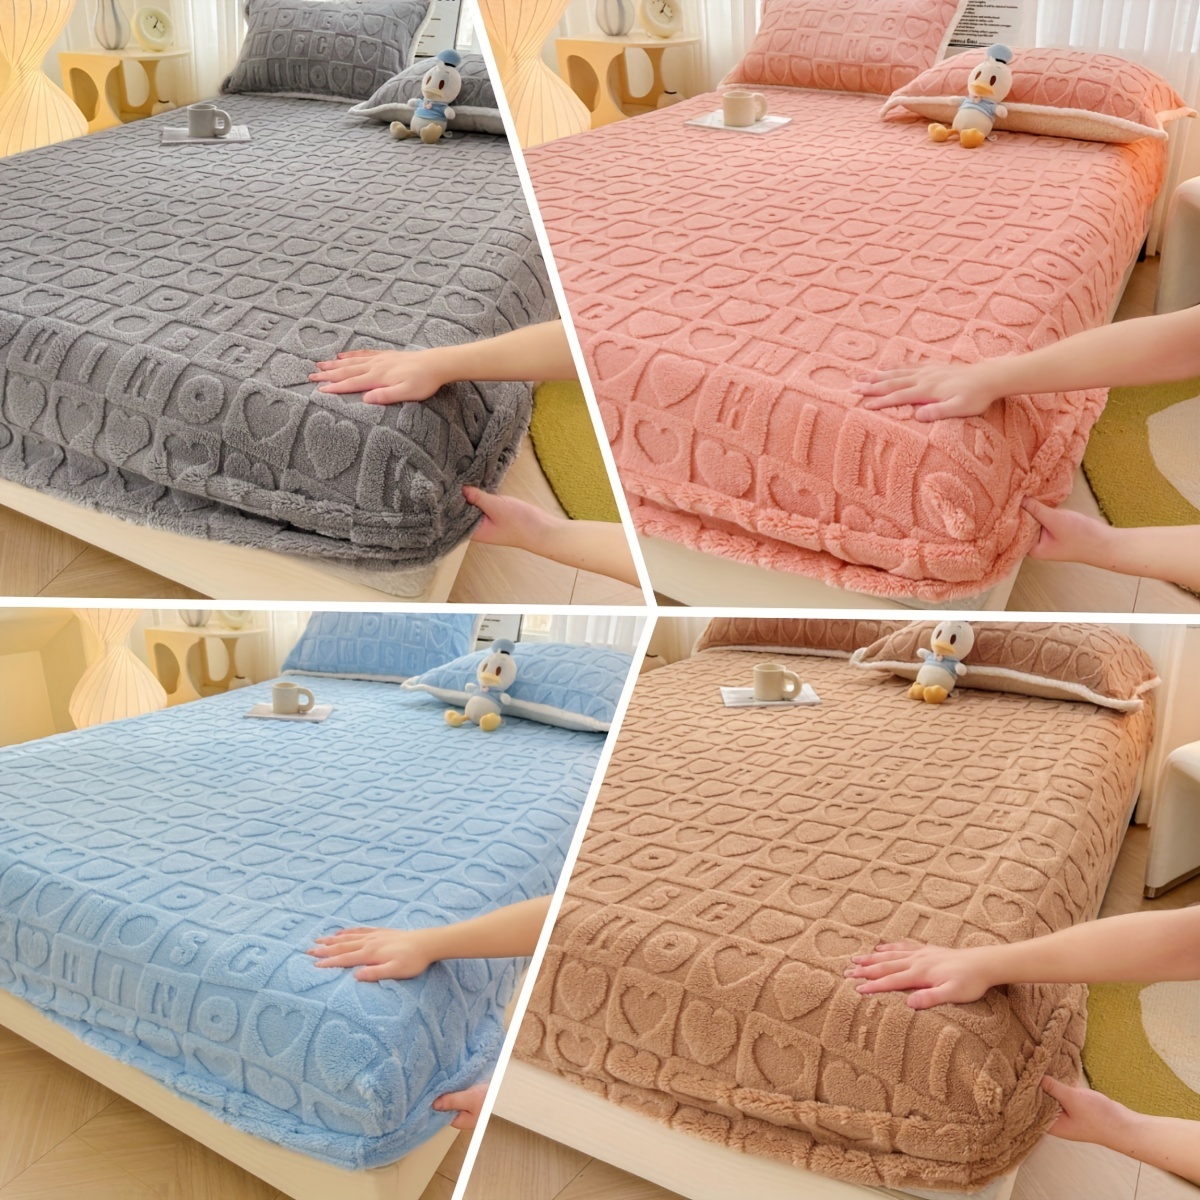 1pc winter warm Fitted Sheet Elastic Thick Soft Bed Sheets Non-slip Luxury  Double Bed Pad